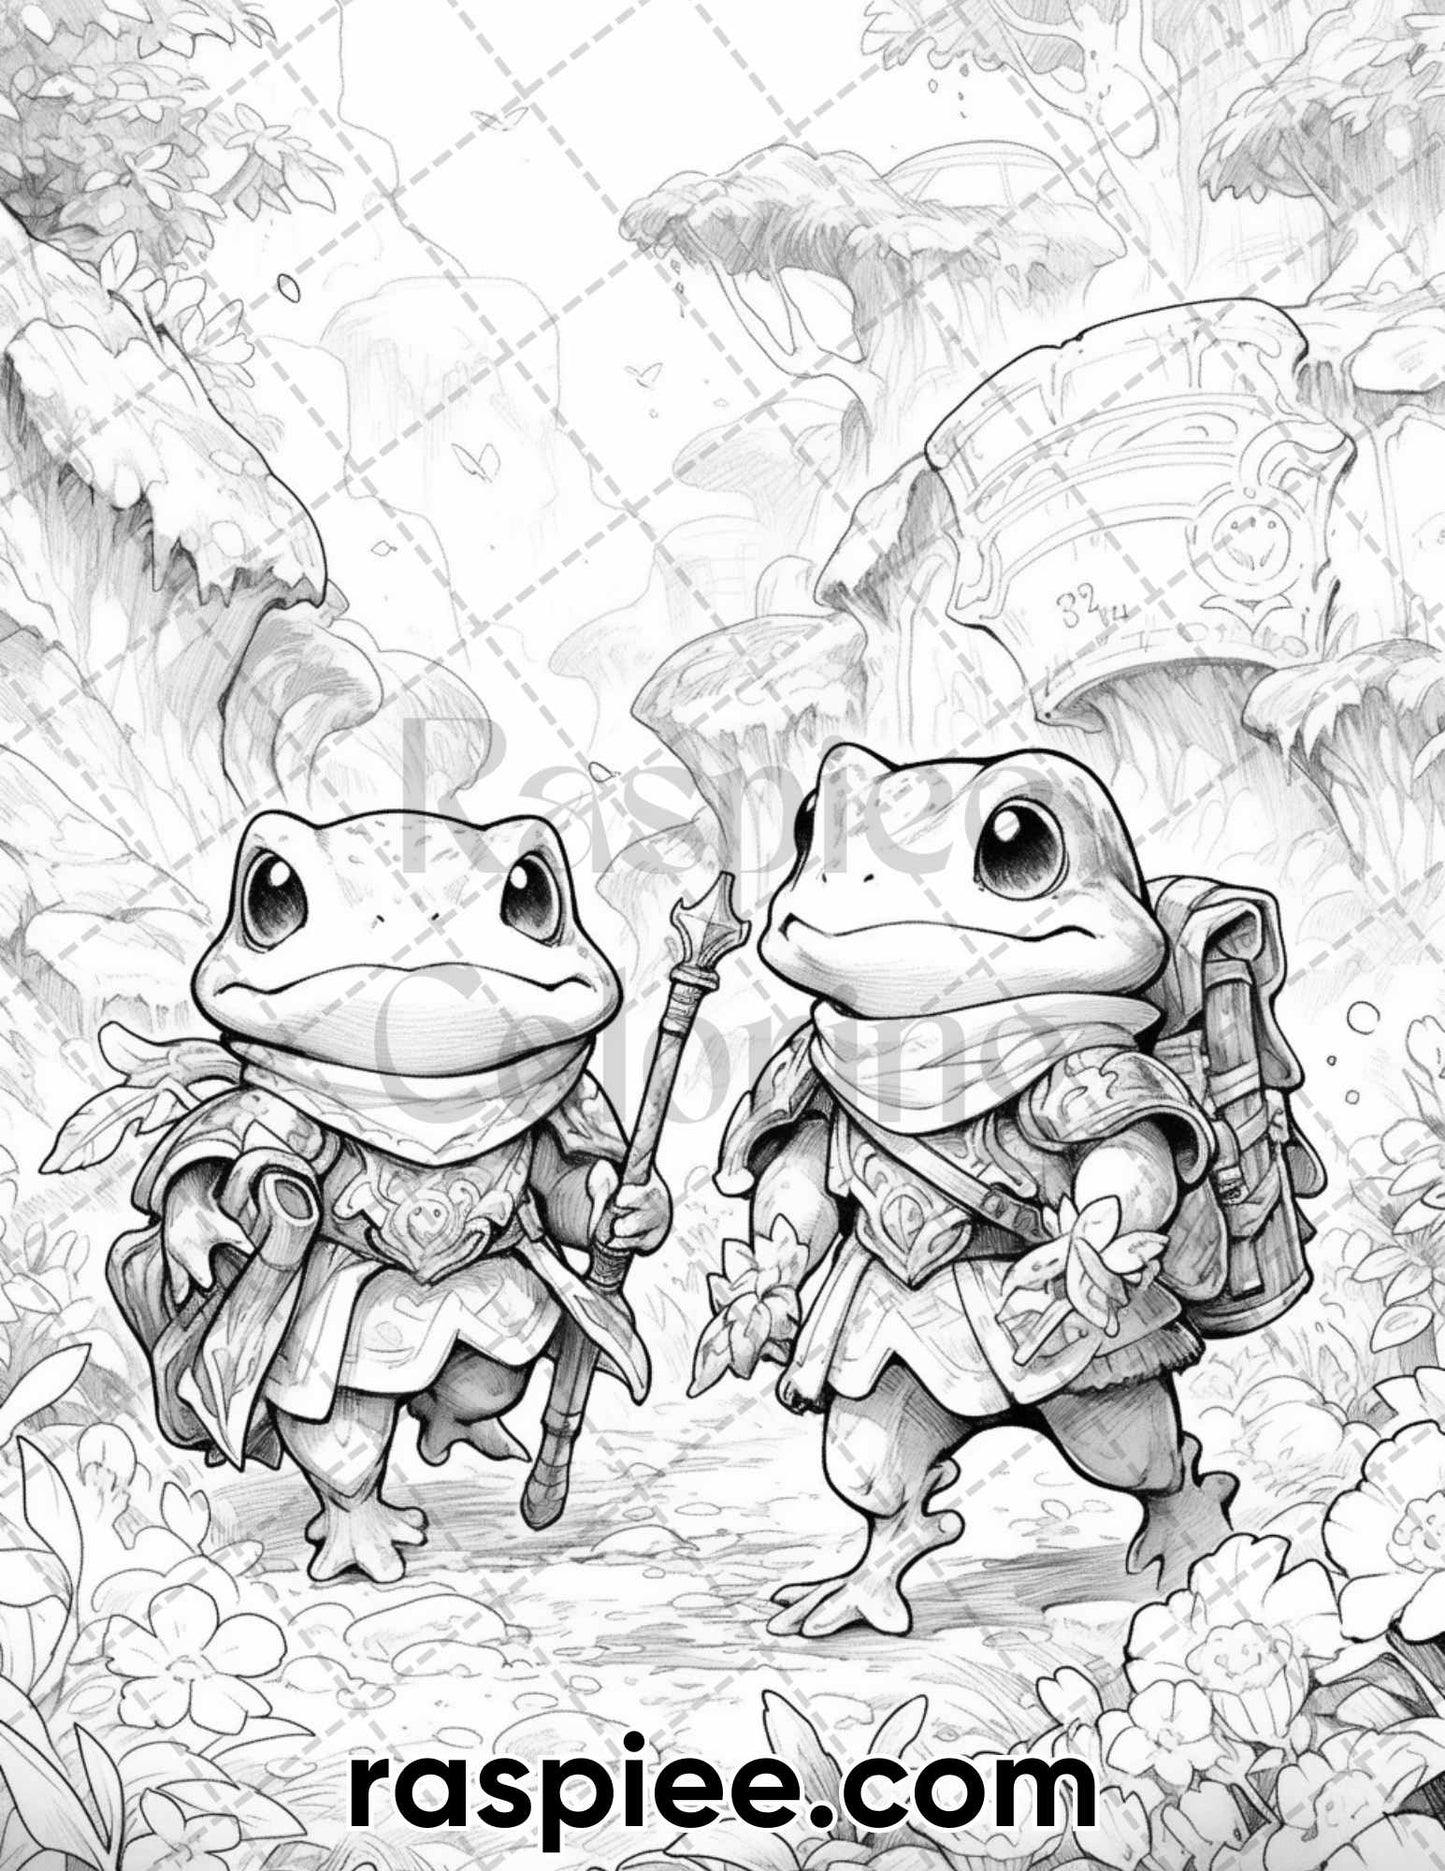 50 The Frog Kingdom Grayscale Coloring Pages for Adults, Printable PDF Instant Download